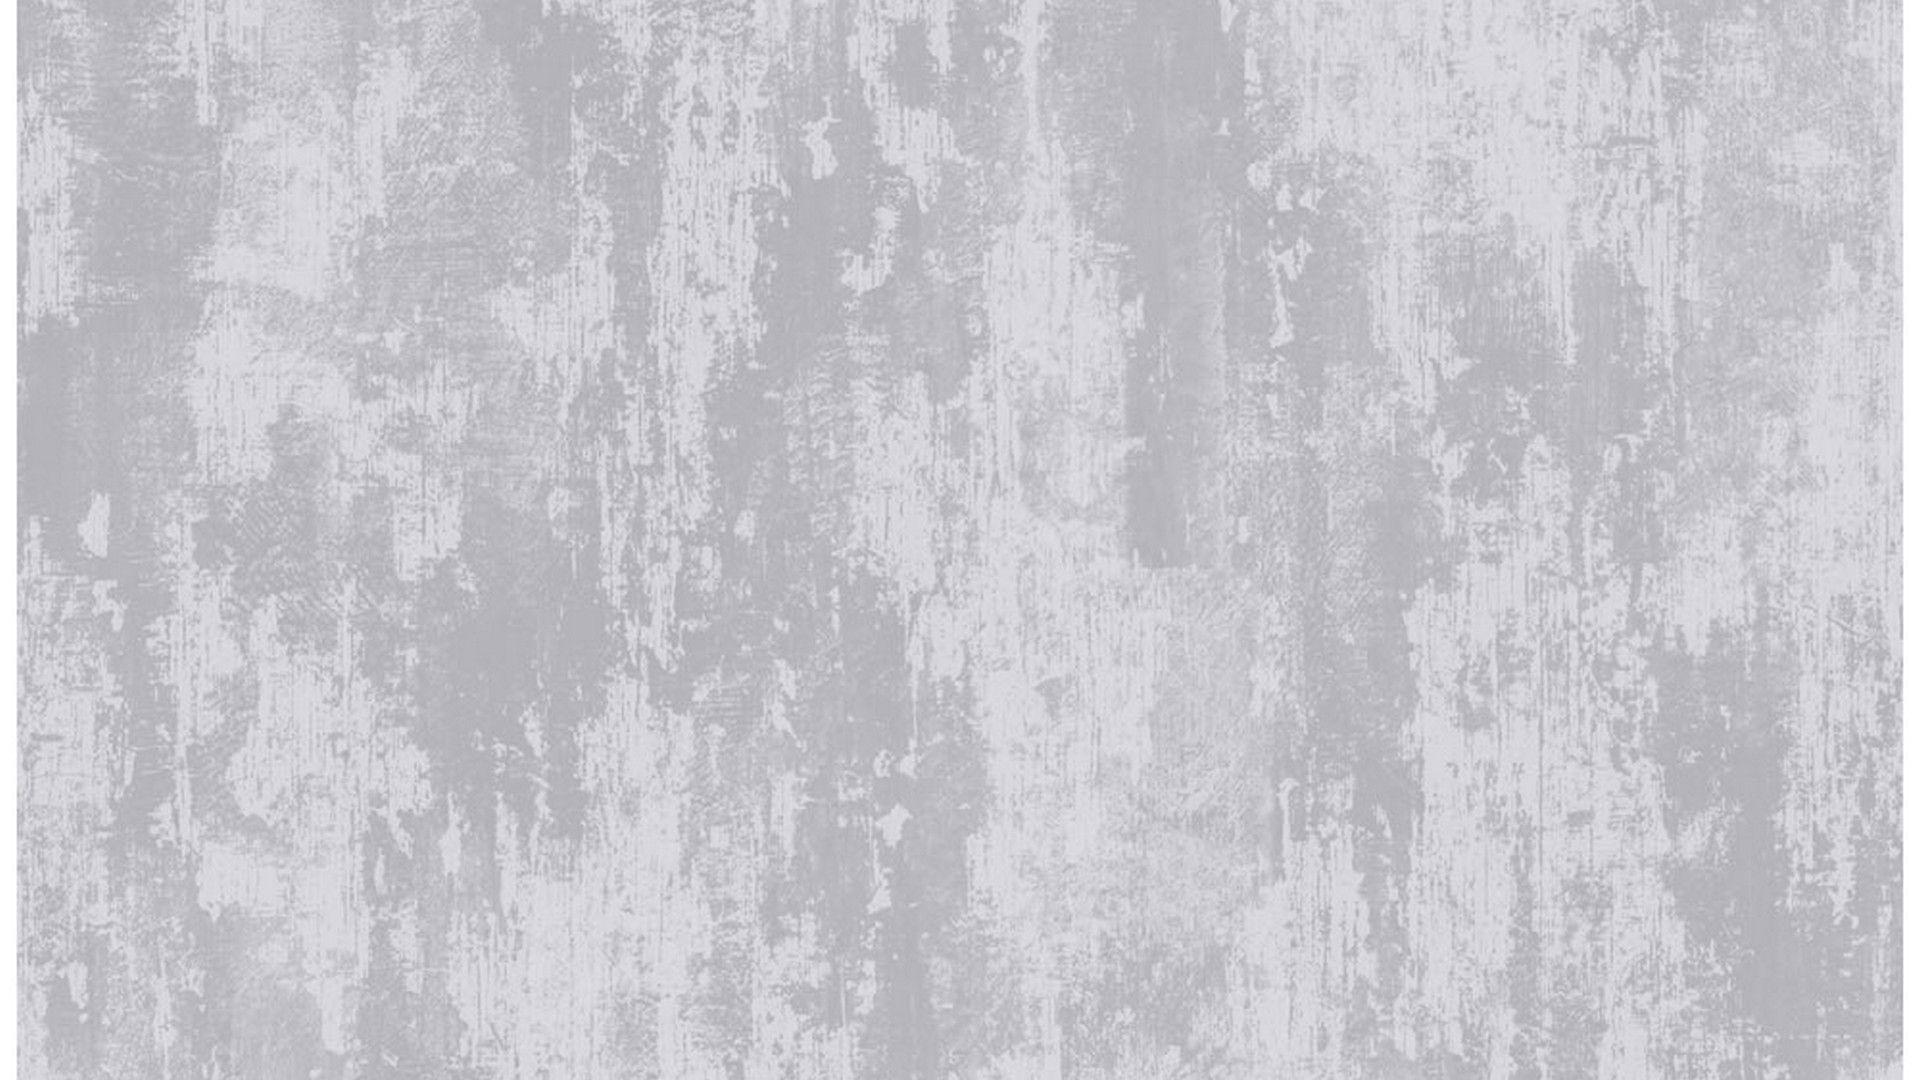 20 Perfect wallpaper aesthetic grey You Can Get It For Free - Aesthetic ...